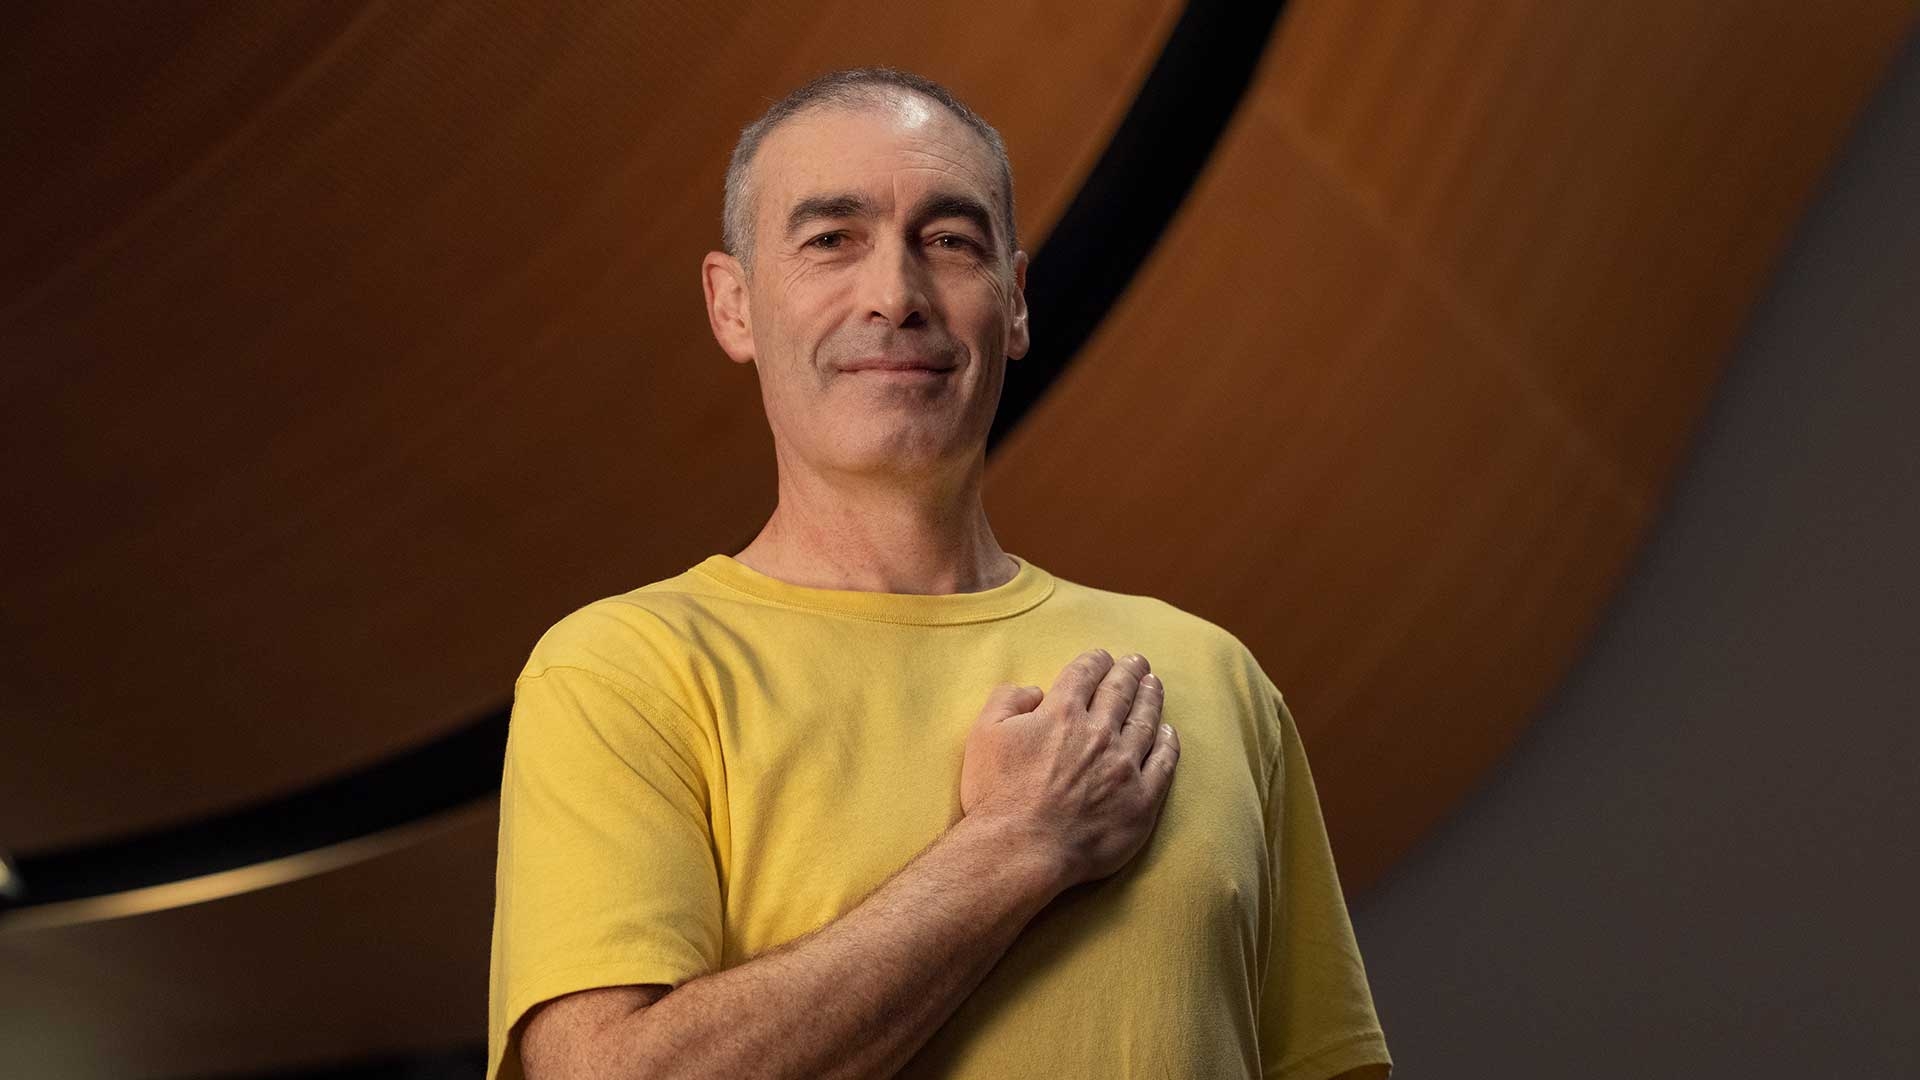 Greg Page in a yellow t-shirt with his hand on heart